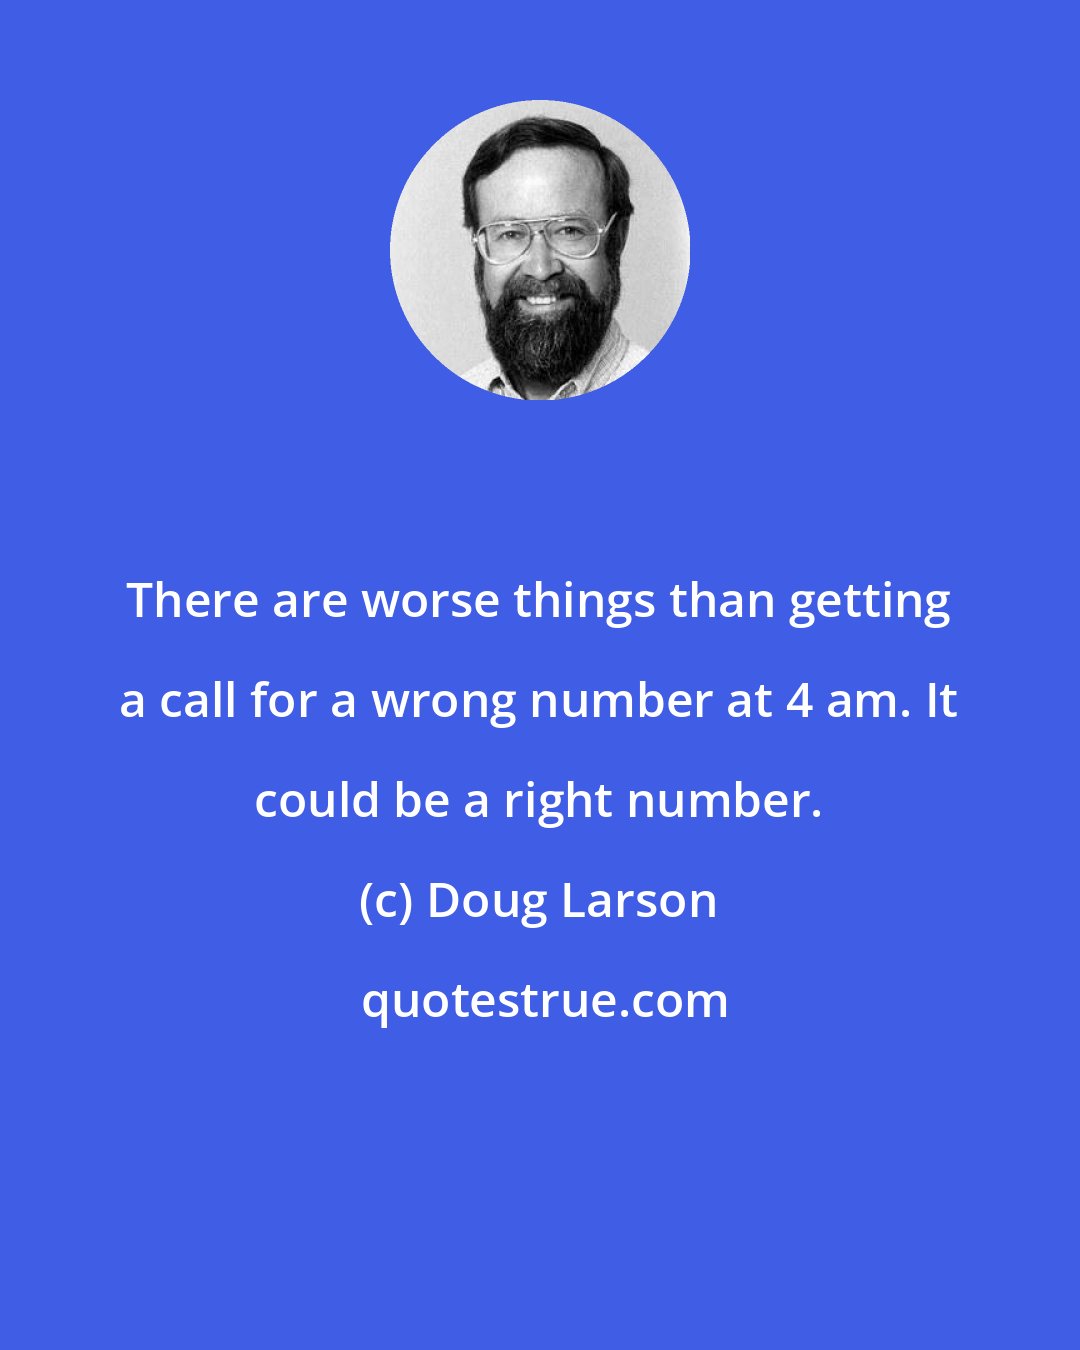 Doug Larson: There are worse things than getting a call for a wrong number at 4 am. It could be a right number.